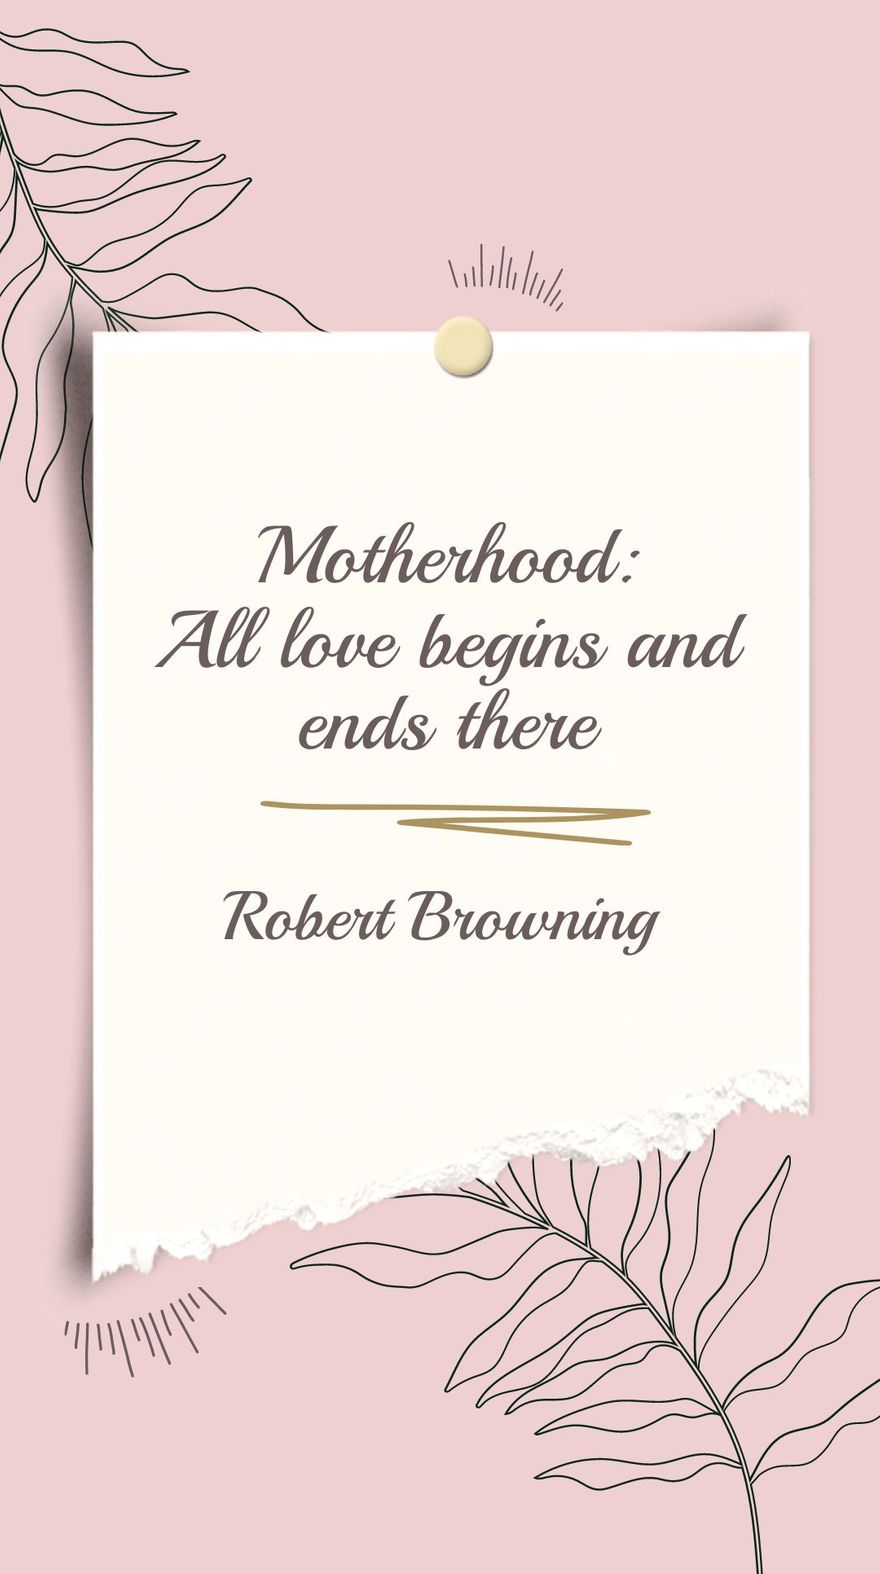 Free Robert Browning - Motherhood: All love begins and ends there. in JPG